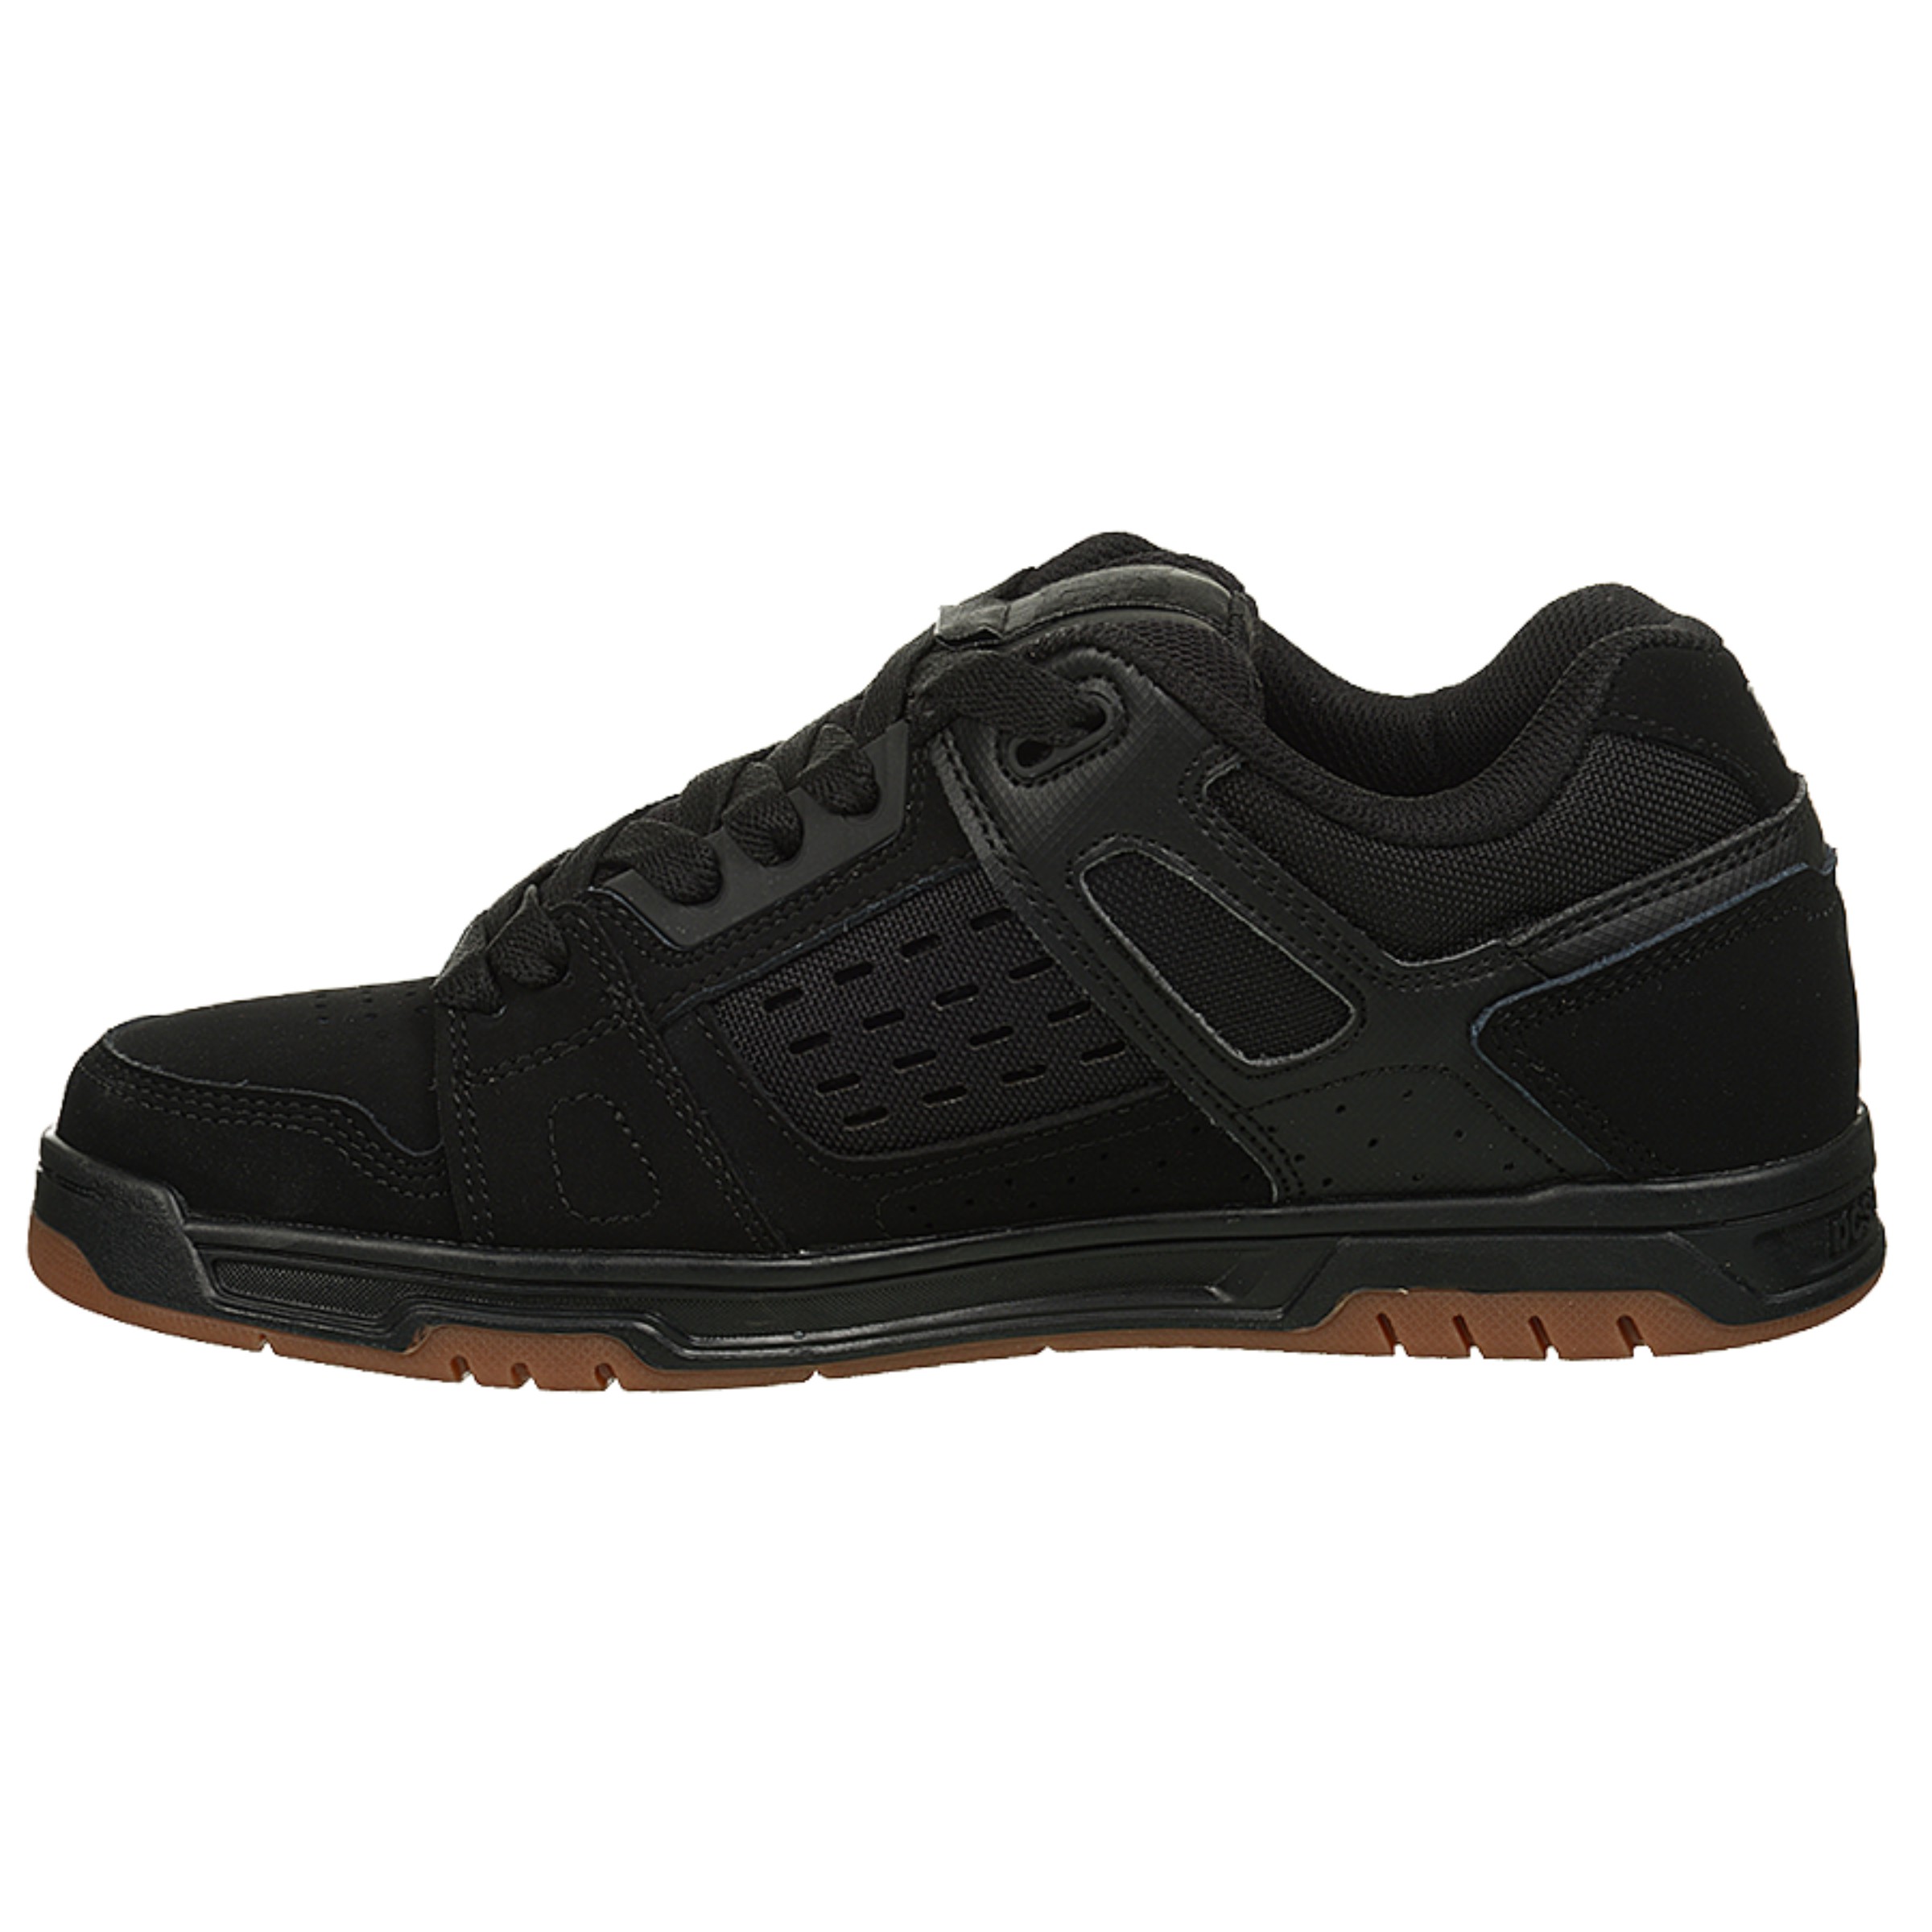 DC Shoes Men's Stag Skate Shoe Black, Sneakers and Athletic Shoes 